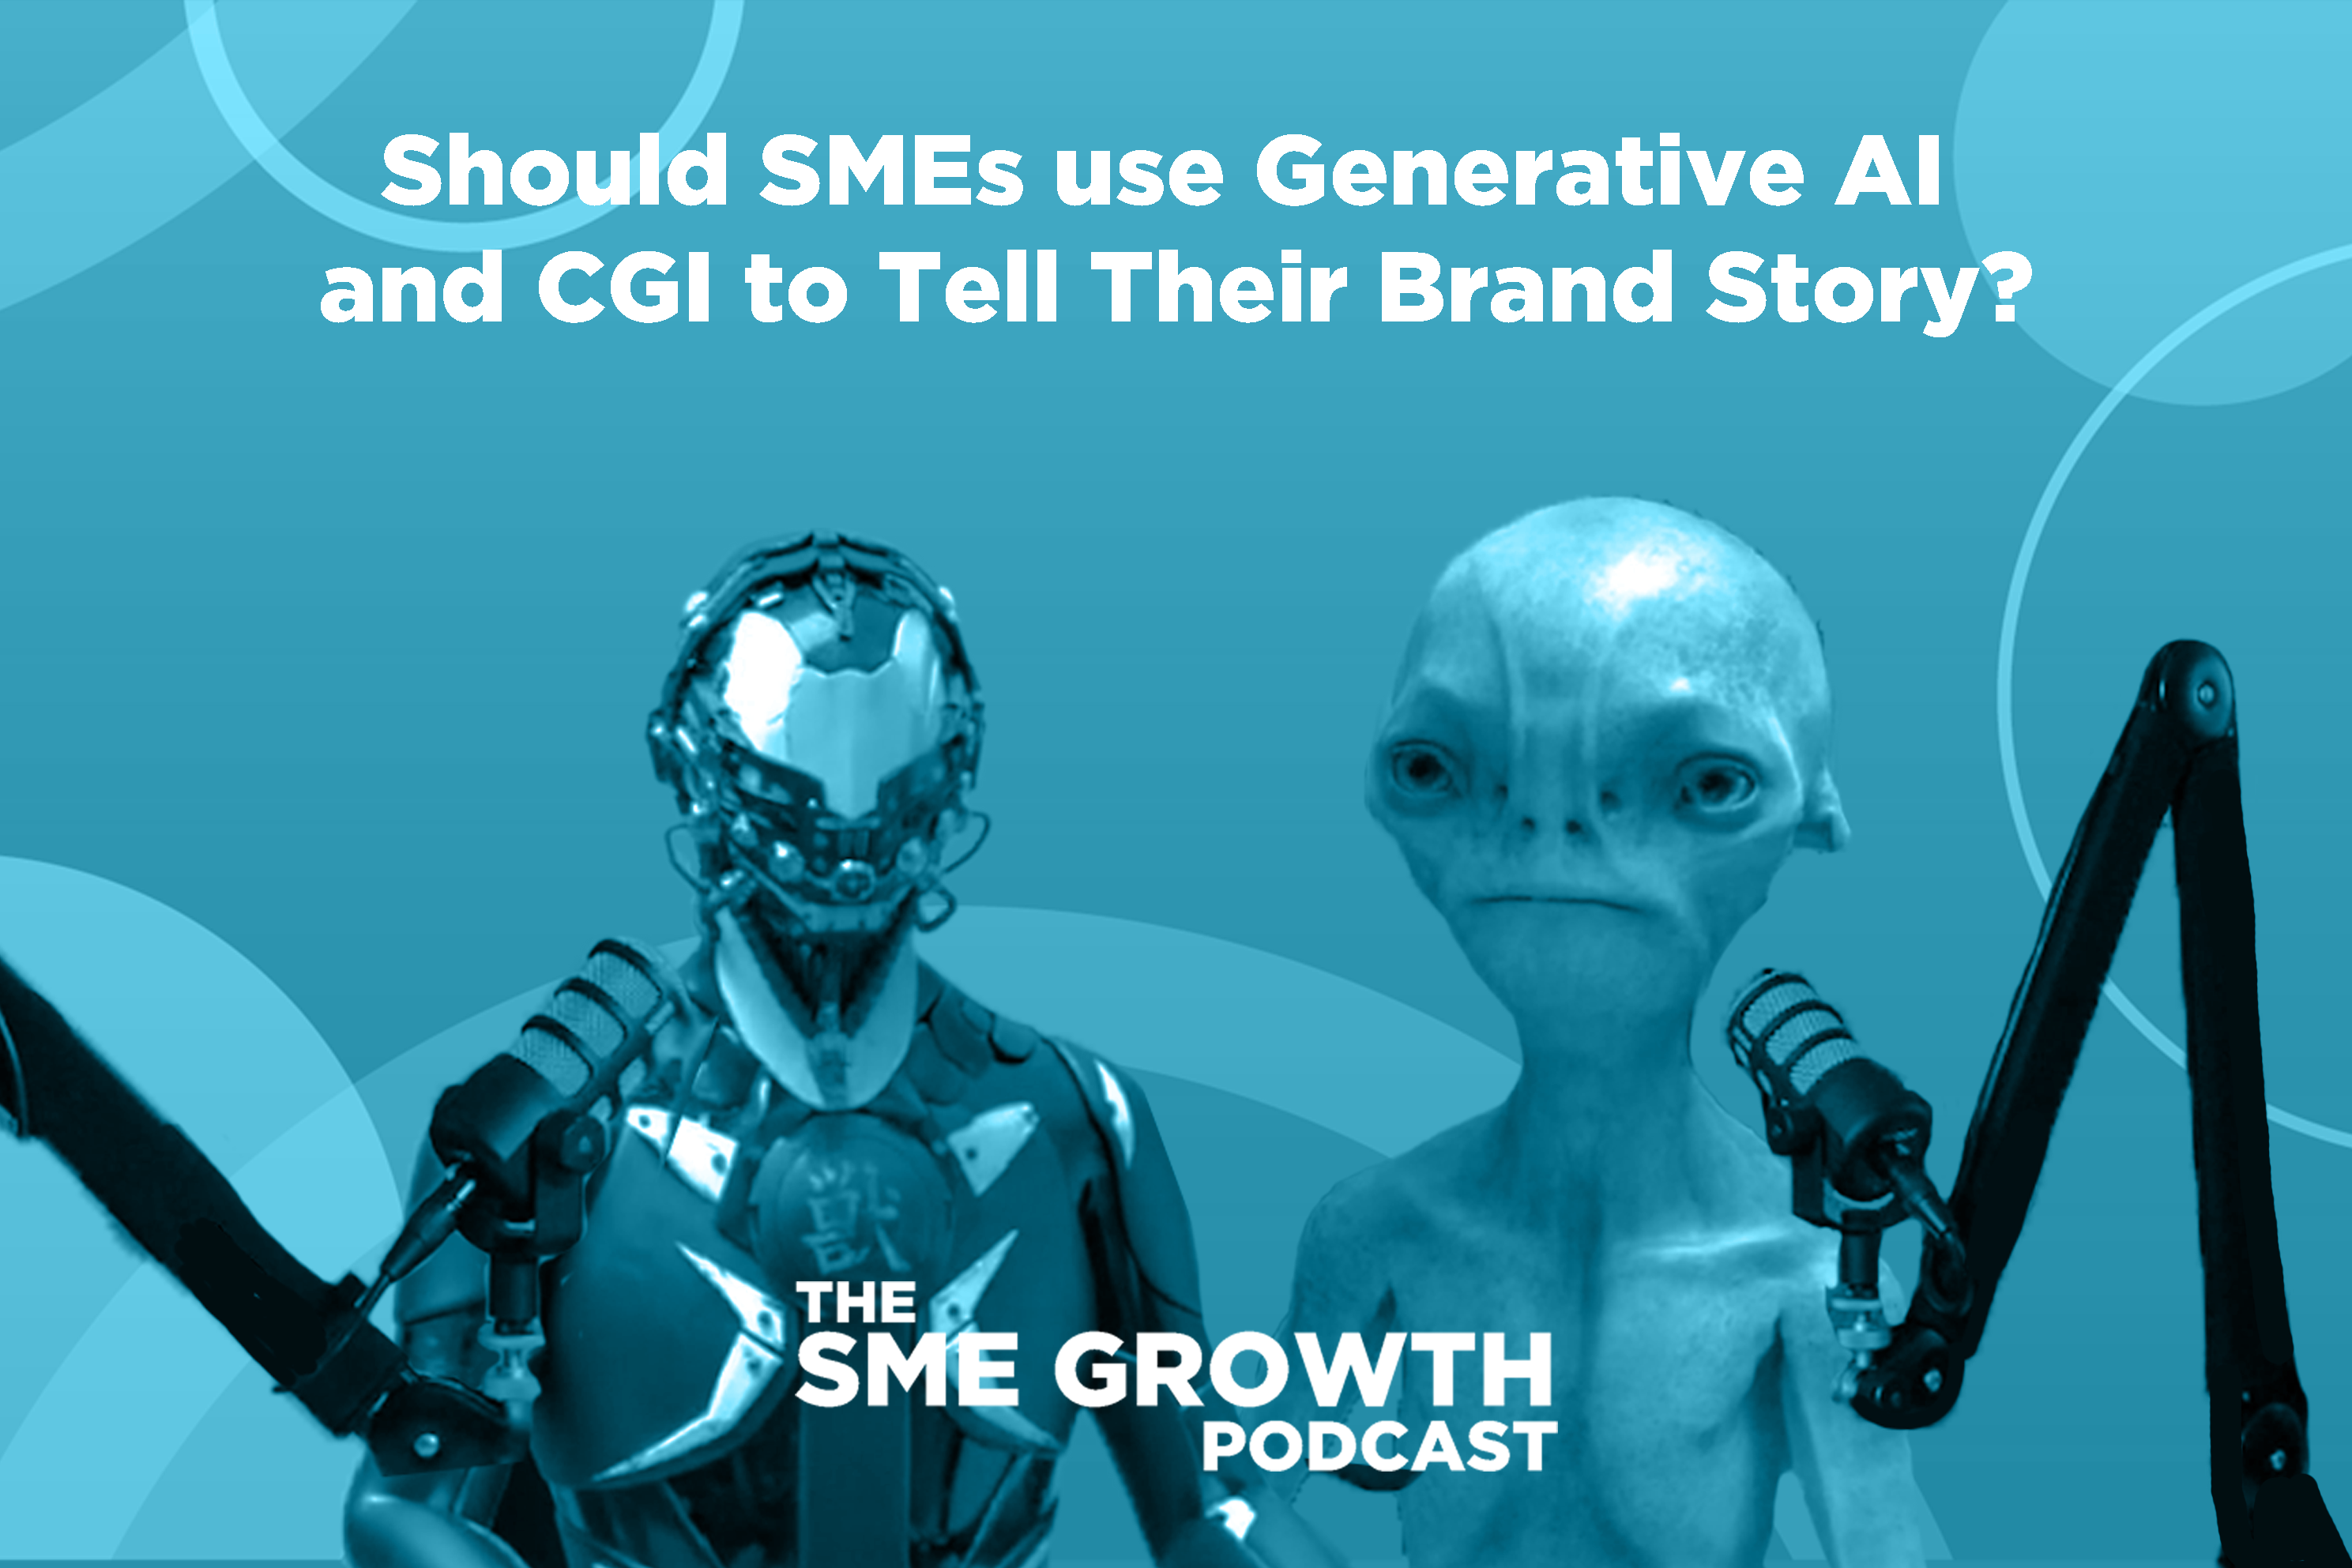 Should SMEs use Generative AI and CGI to Tell Their Brand Story? The SME Growth podcast. Blue banner with a robot and alien speaking into microphones.